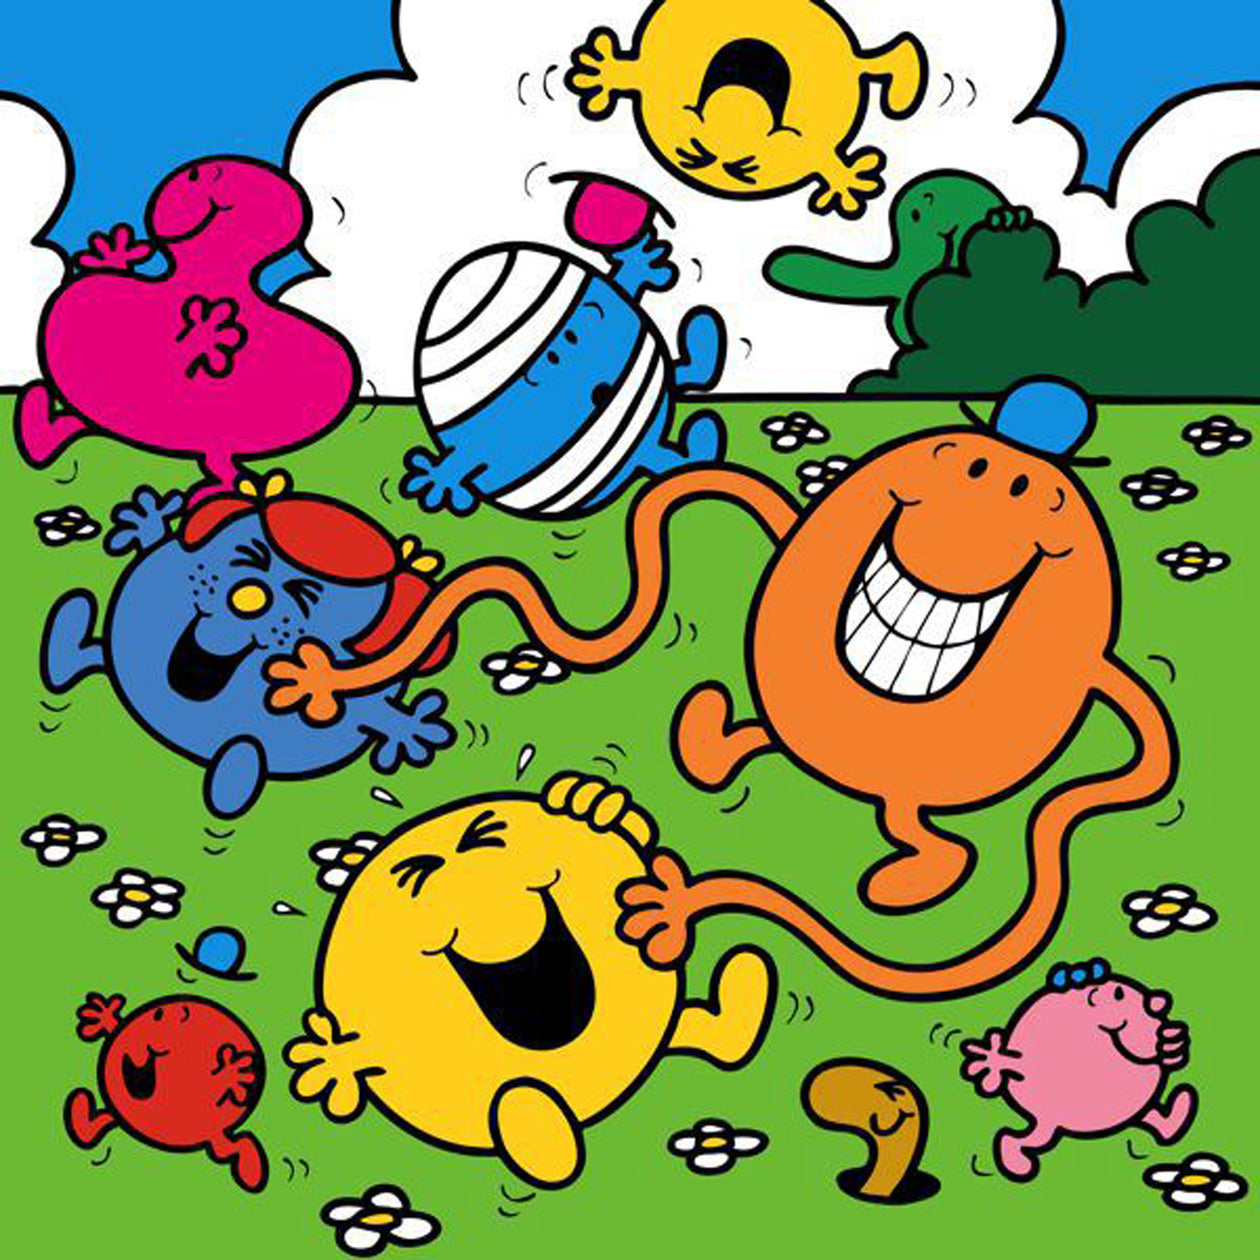 Greeting Card: Mr. Men and Little Miss - Characters